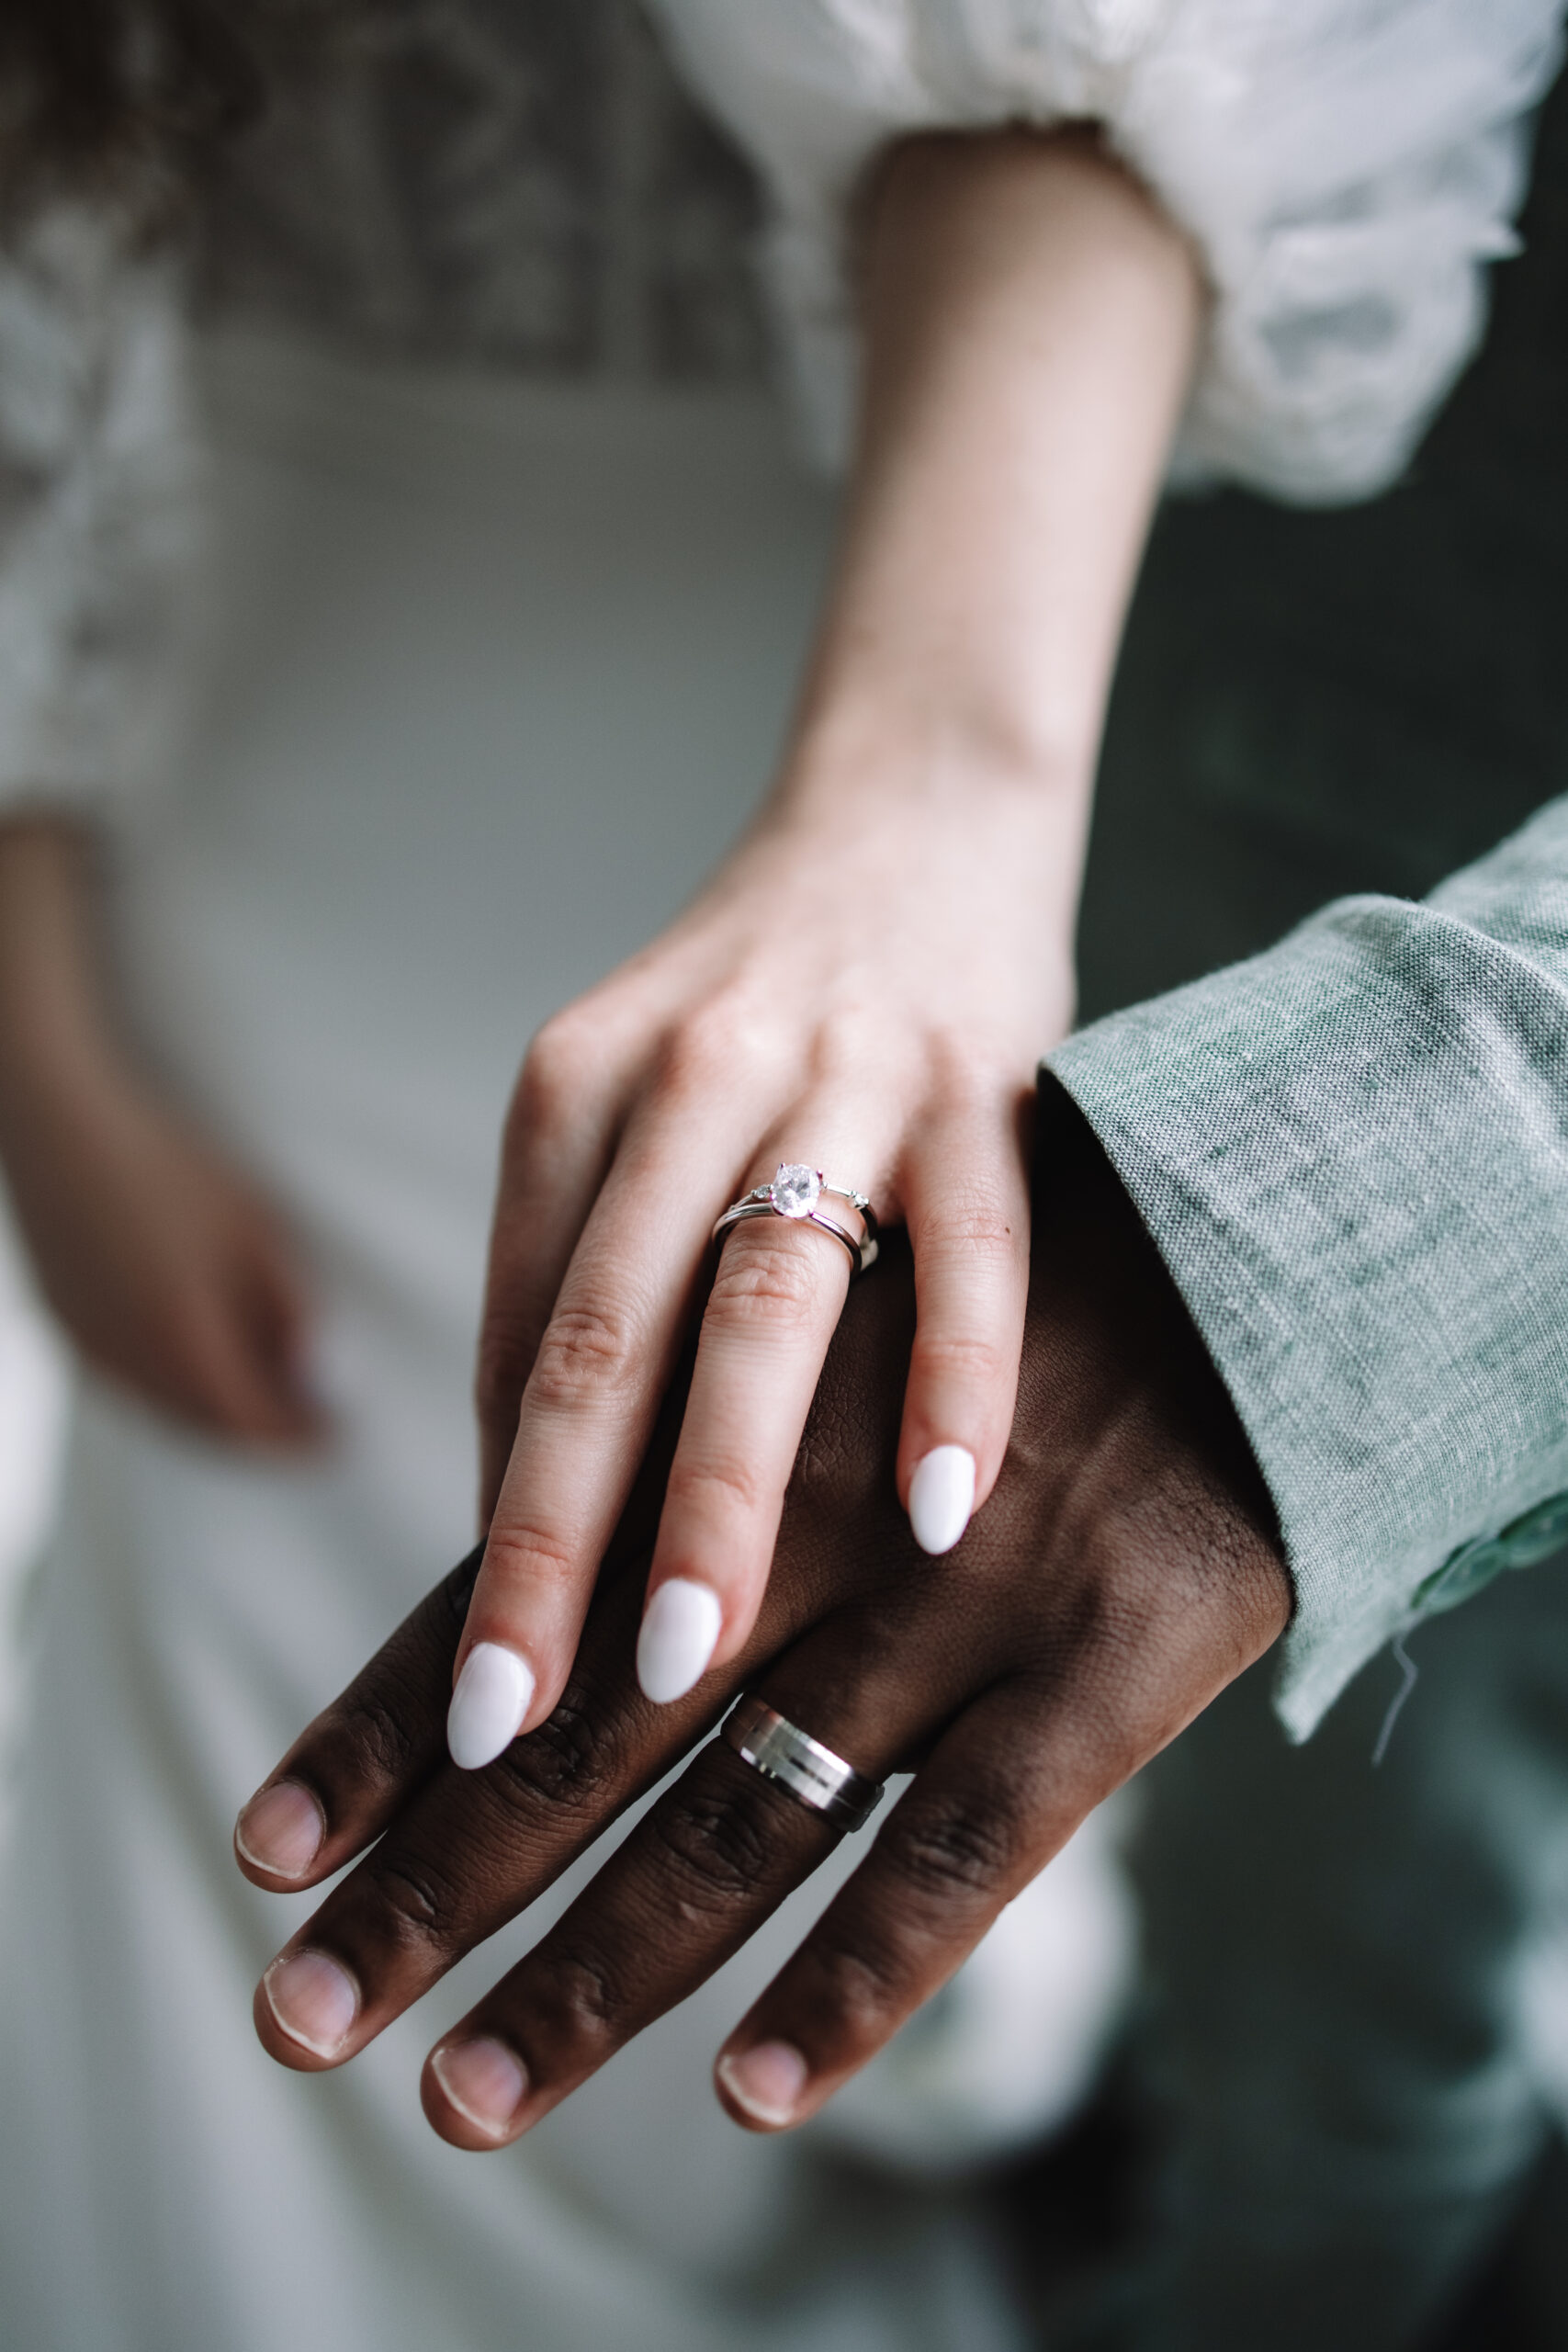 Close-up of a couple's hands, showcasing their wedding rings. The woman's hand has a diamond ring and manicured nails, while the man's hand wears a simple band.